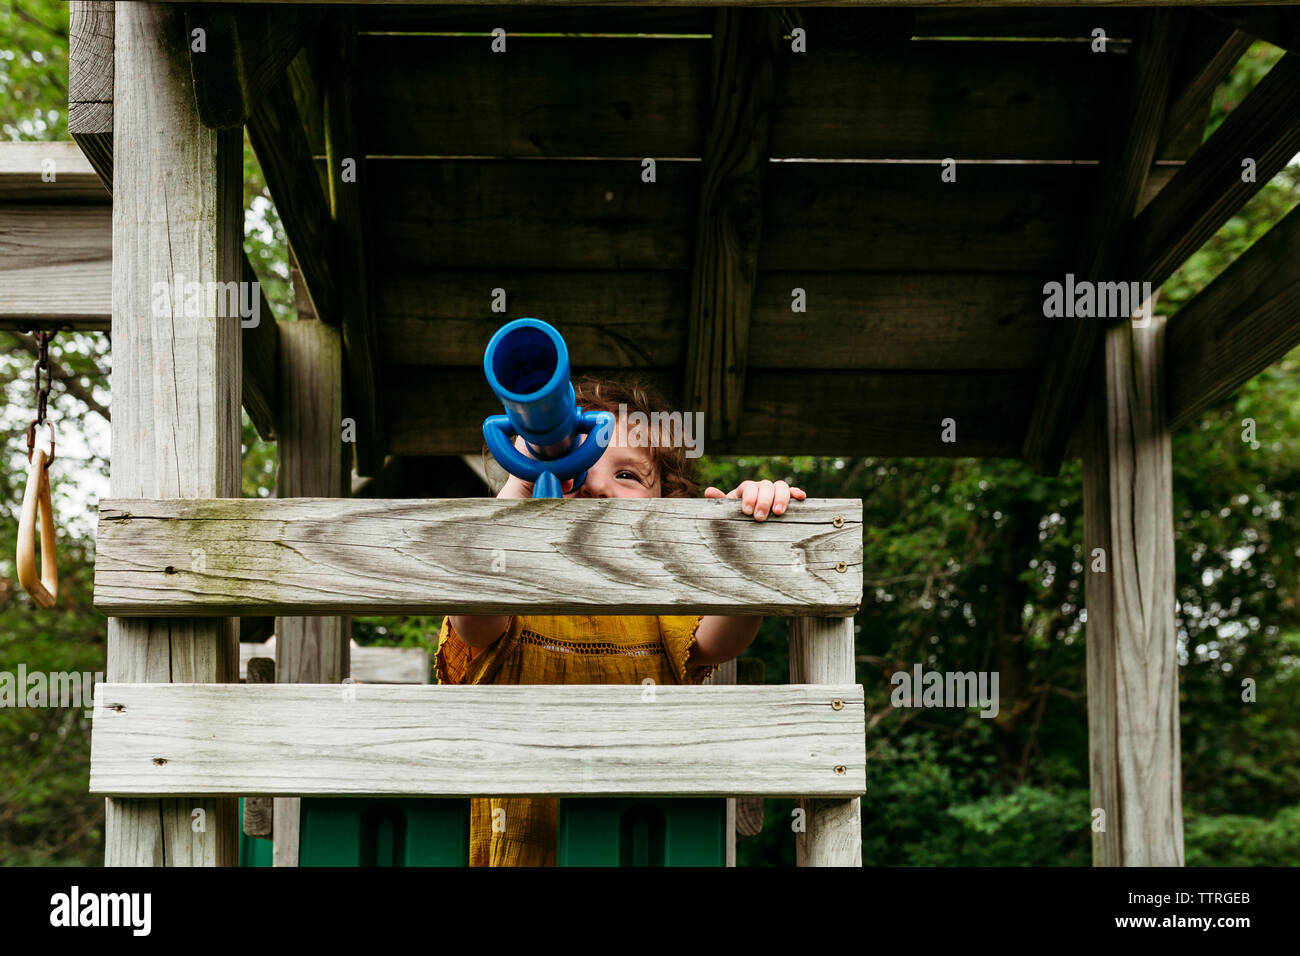 Girl looking through telescope while standing on wooden outdoor play equipment at playground Stock Photo